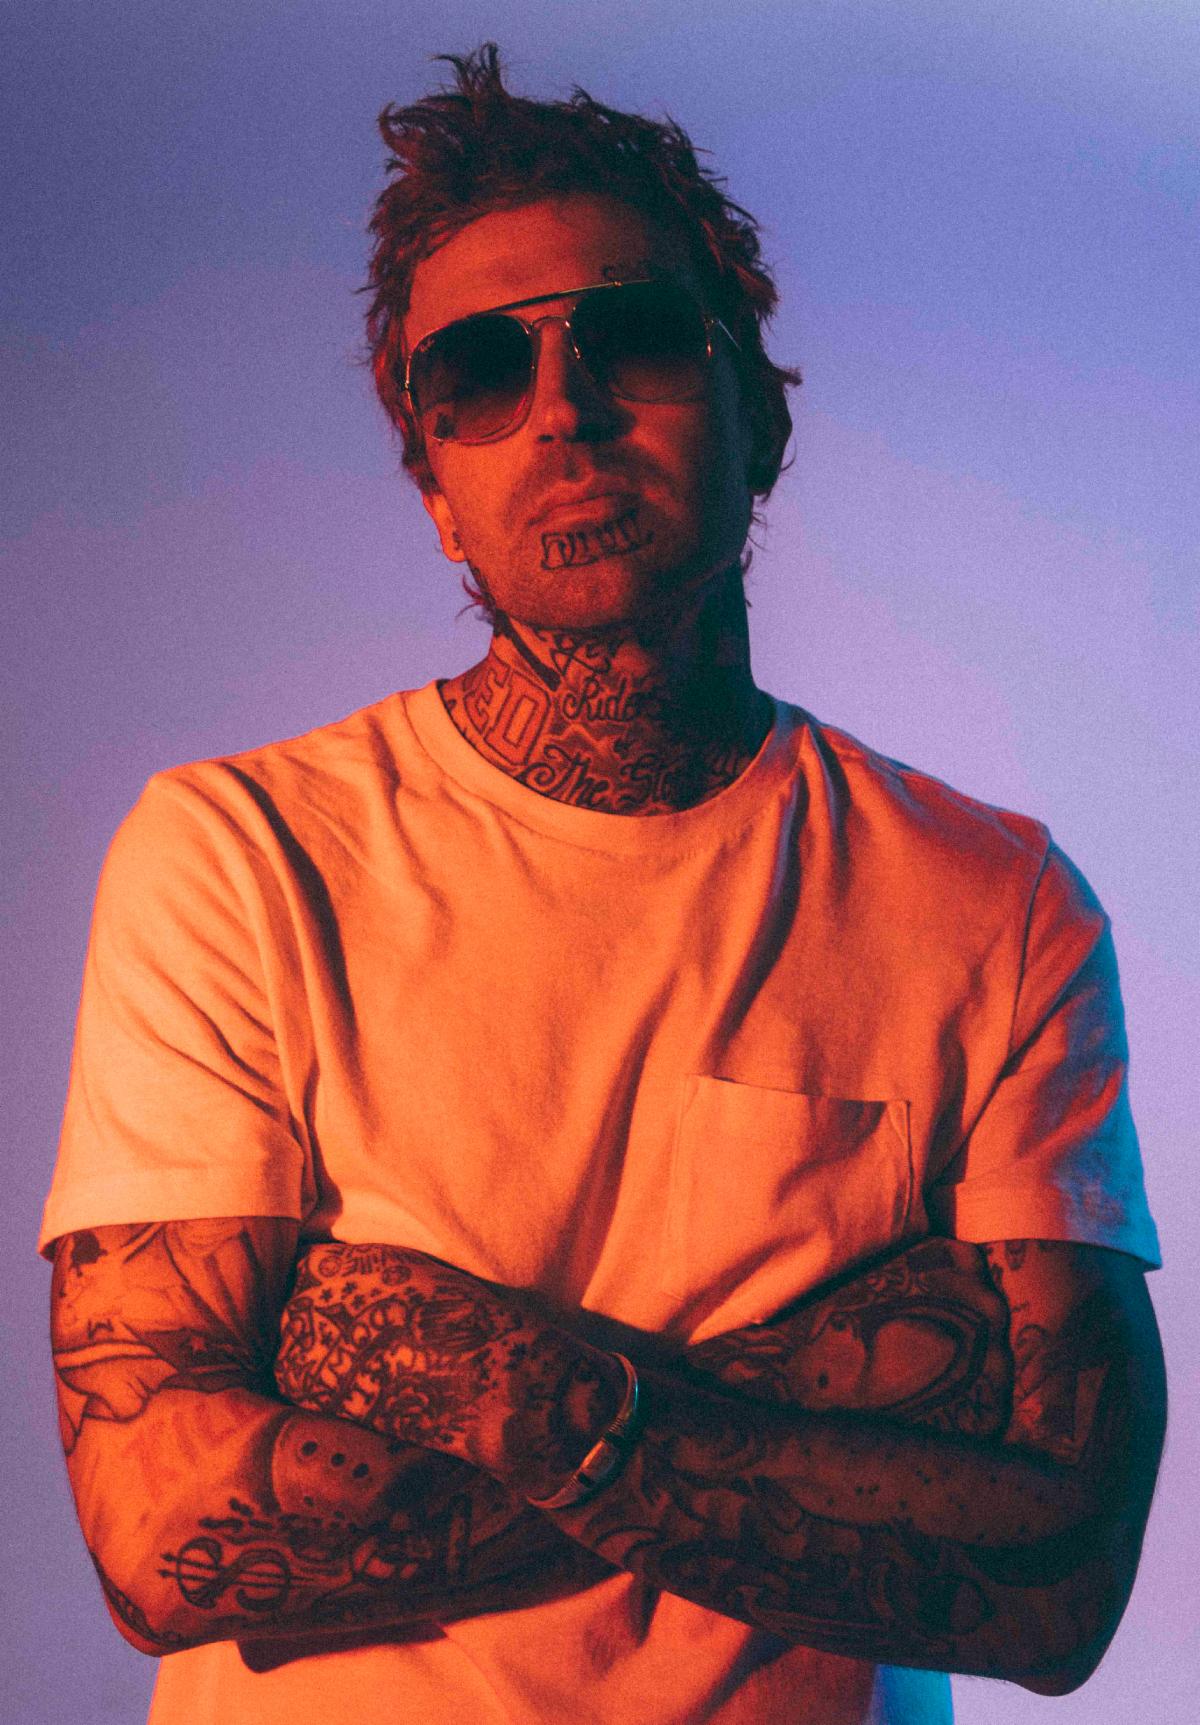 YELAWOLF EMBARKS ON GHETTO COWBOY TOUR OCTOBER 9 IN SUPPORT OF NEW ALBUM